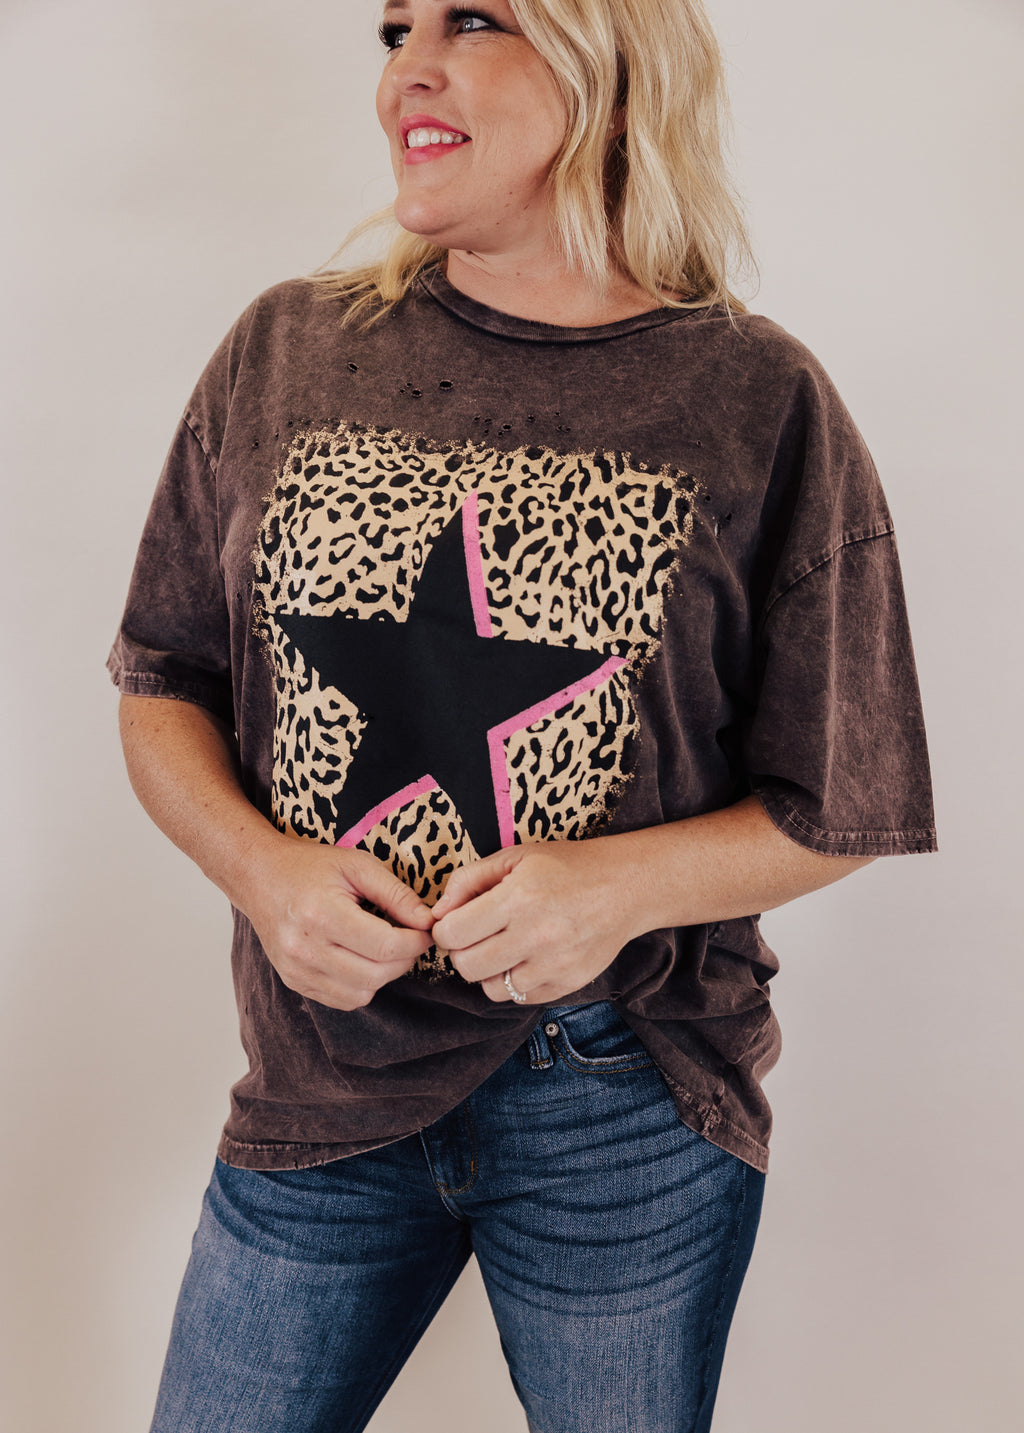 #74 Oversized Distressed Star Leopard Top (CAN FIT XL) *VINTAGE CHARCOAL